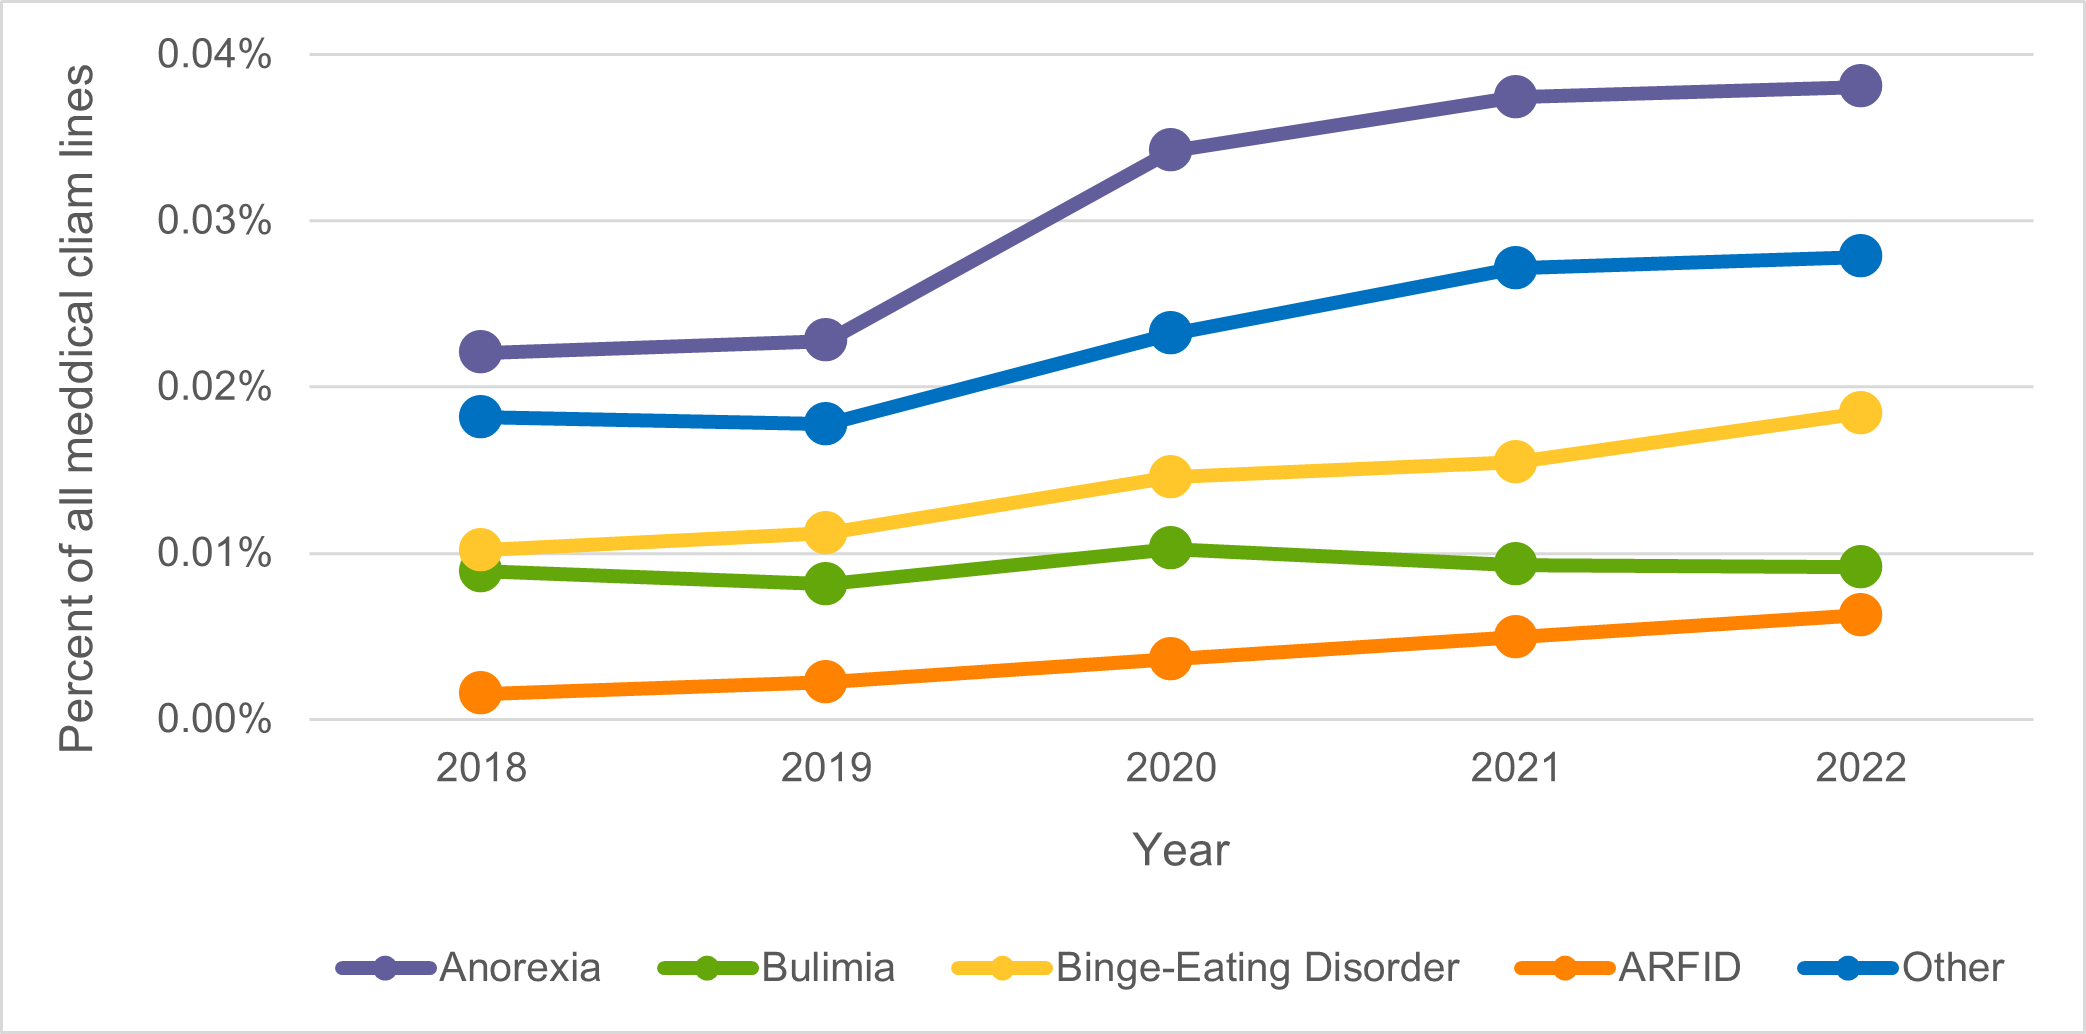 Figure 1. Claim Lines for Specific Eating Disorders as a Percentage of All Medical Claim Lines, 2018-2022